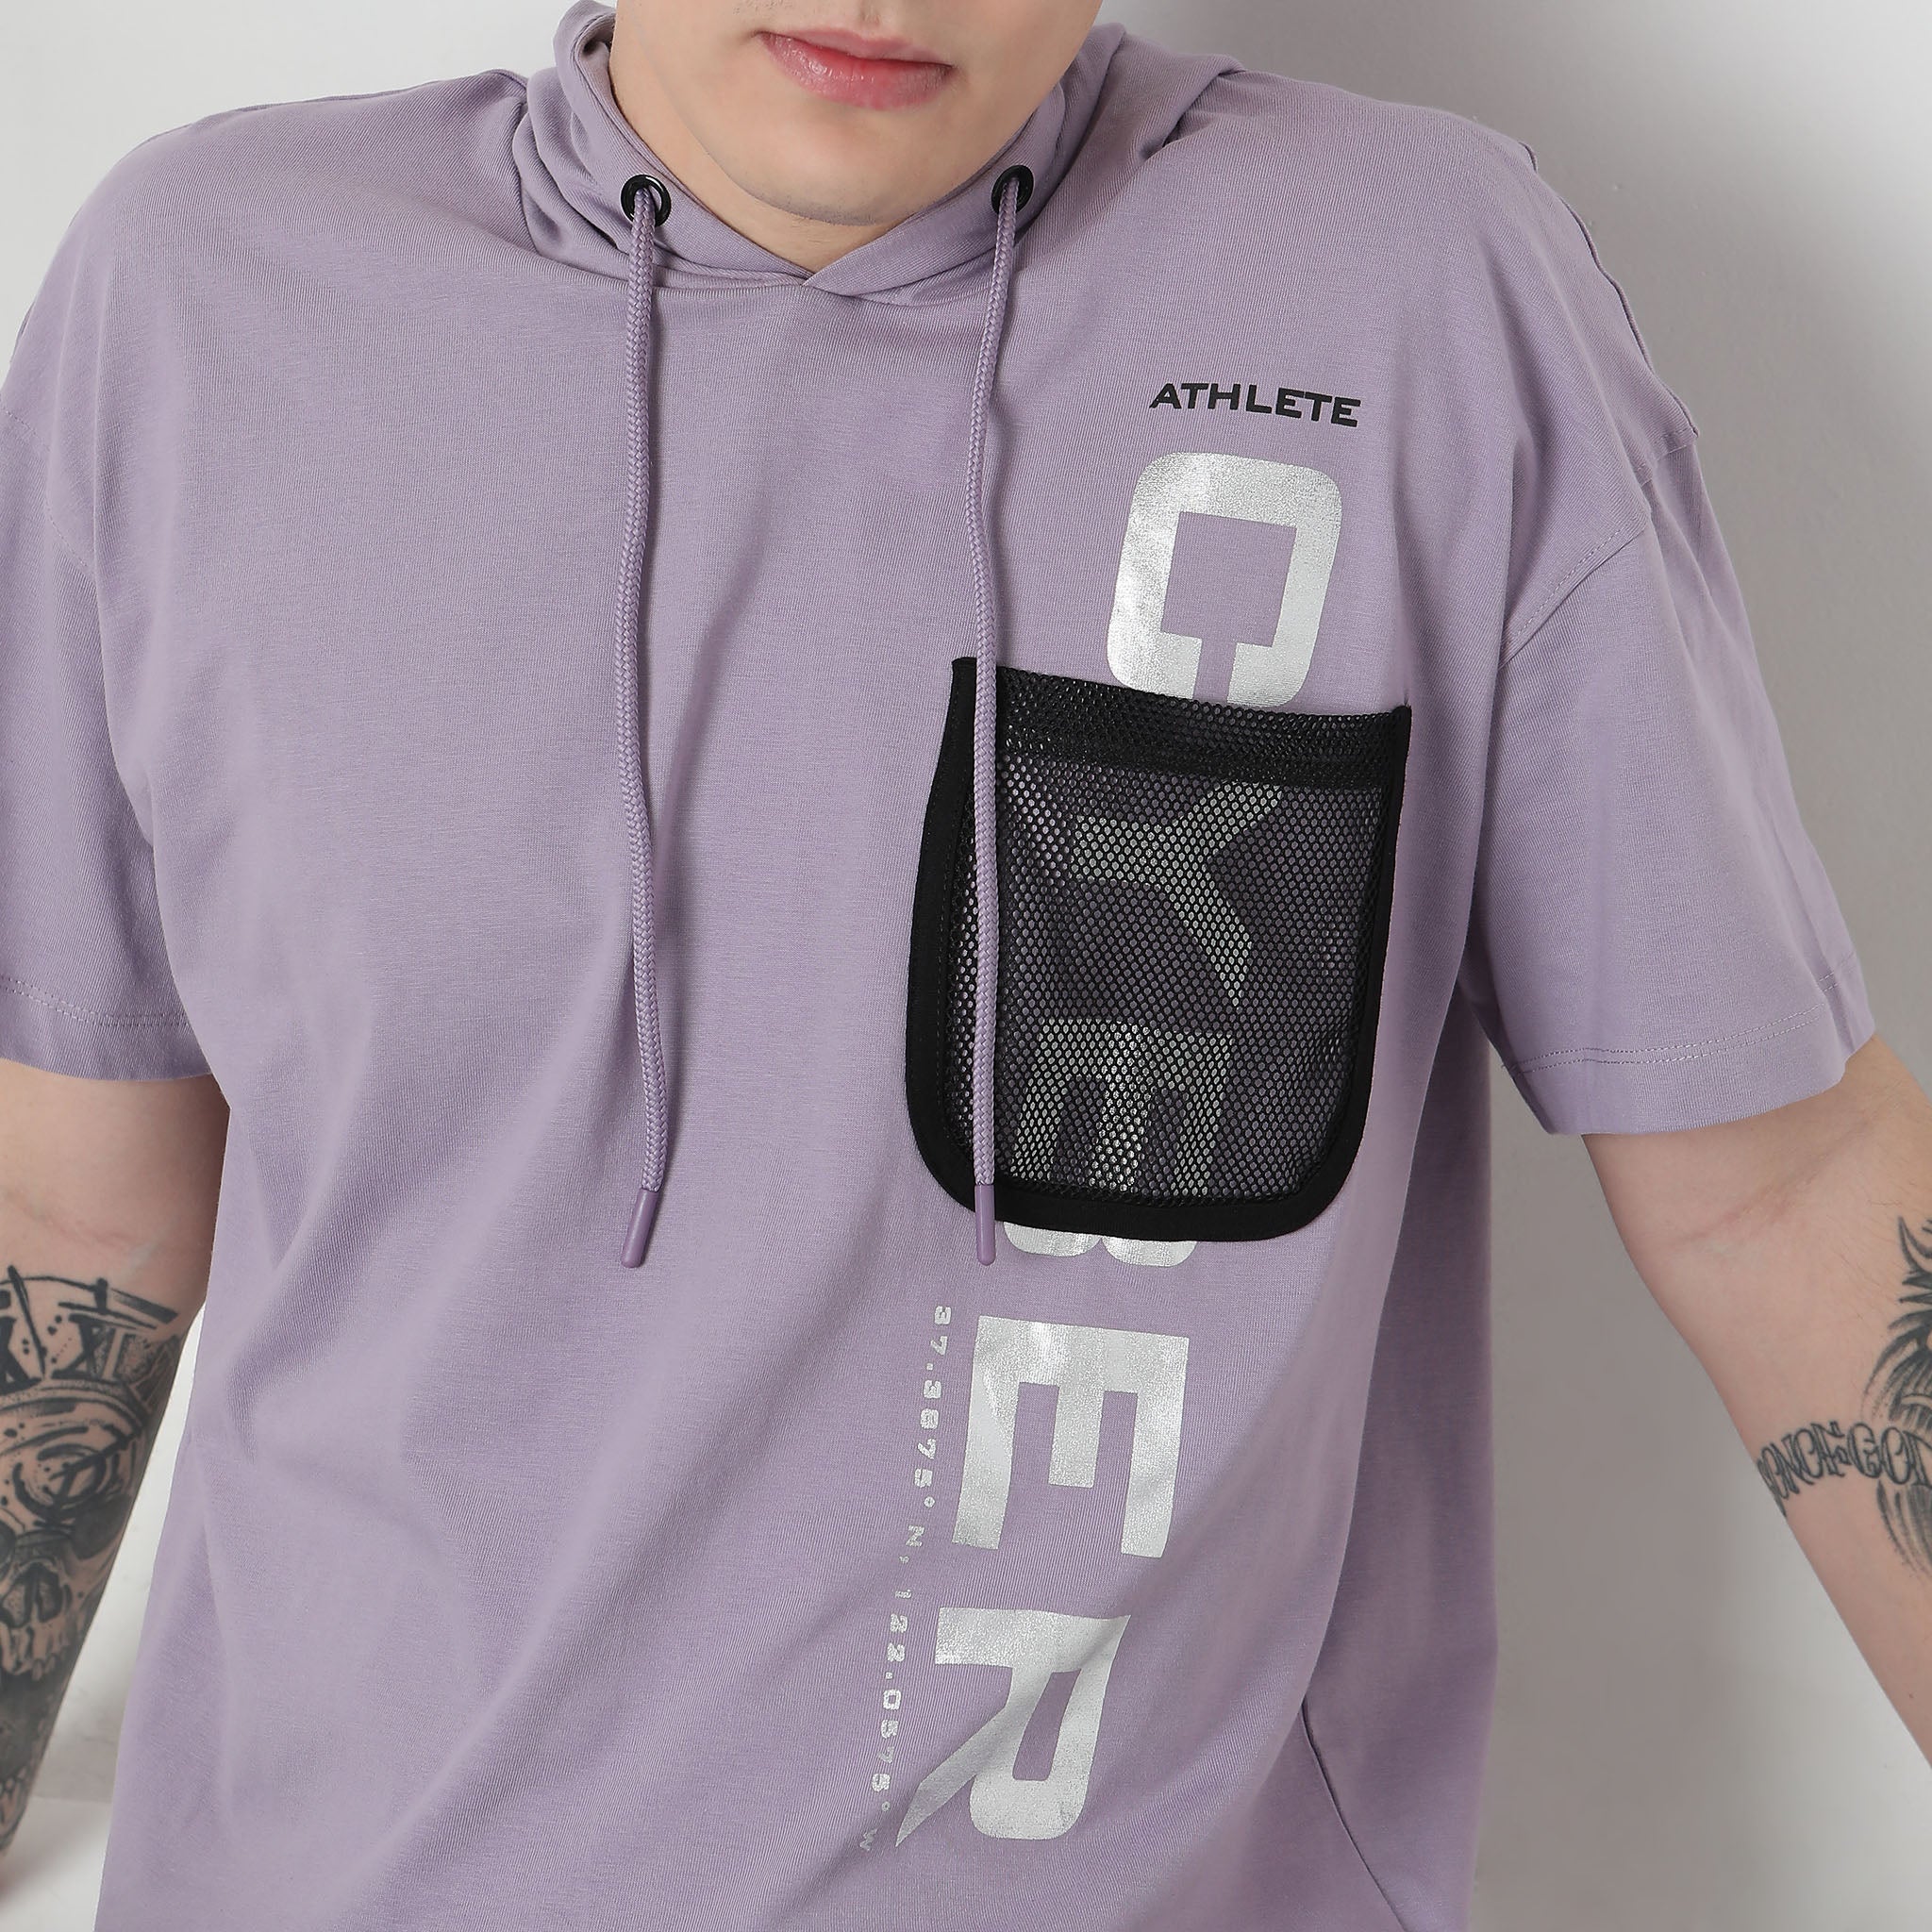 Oversize Solid T-Shirt